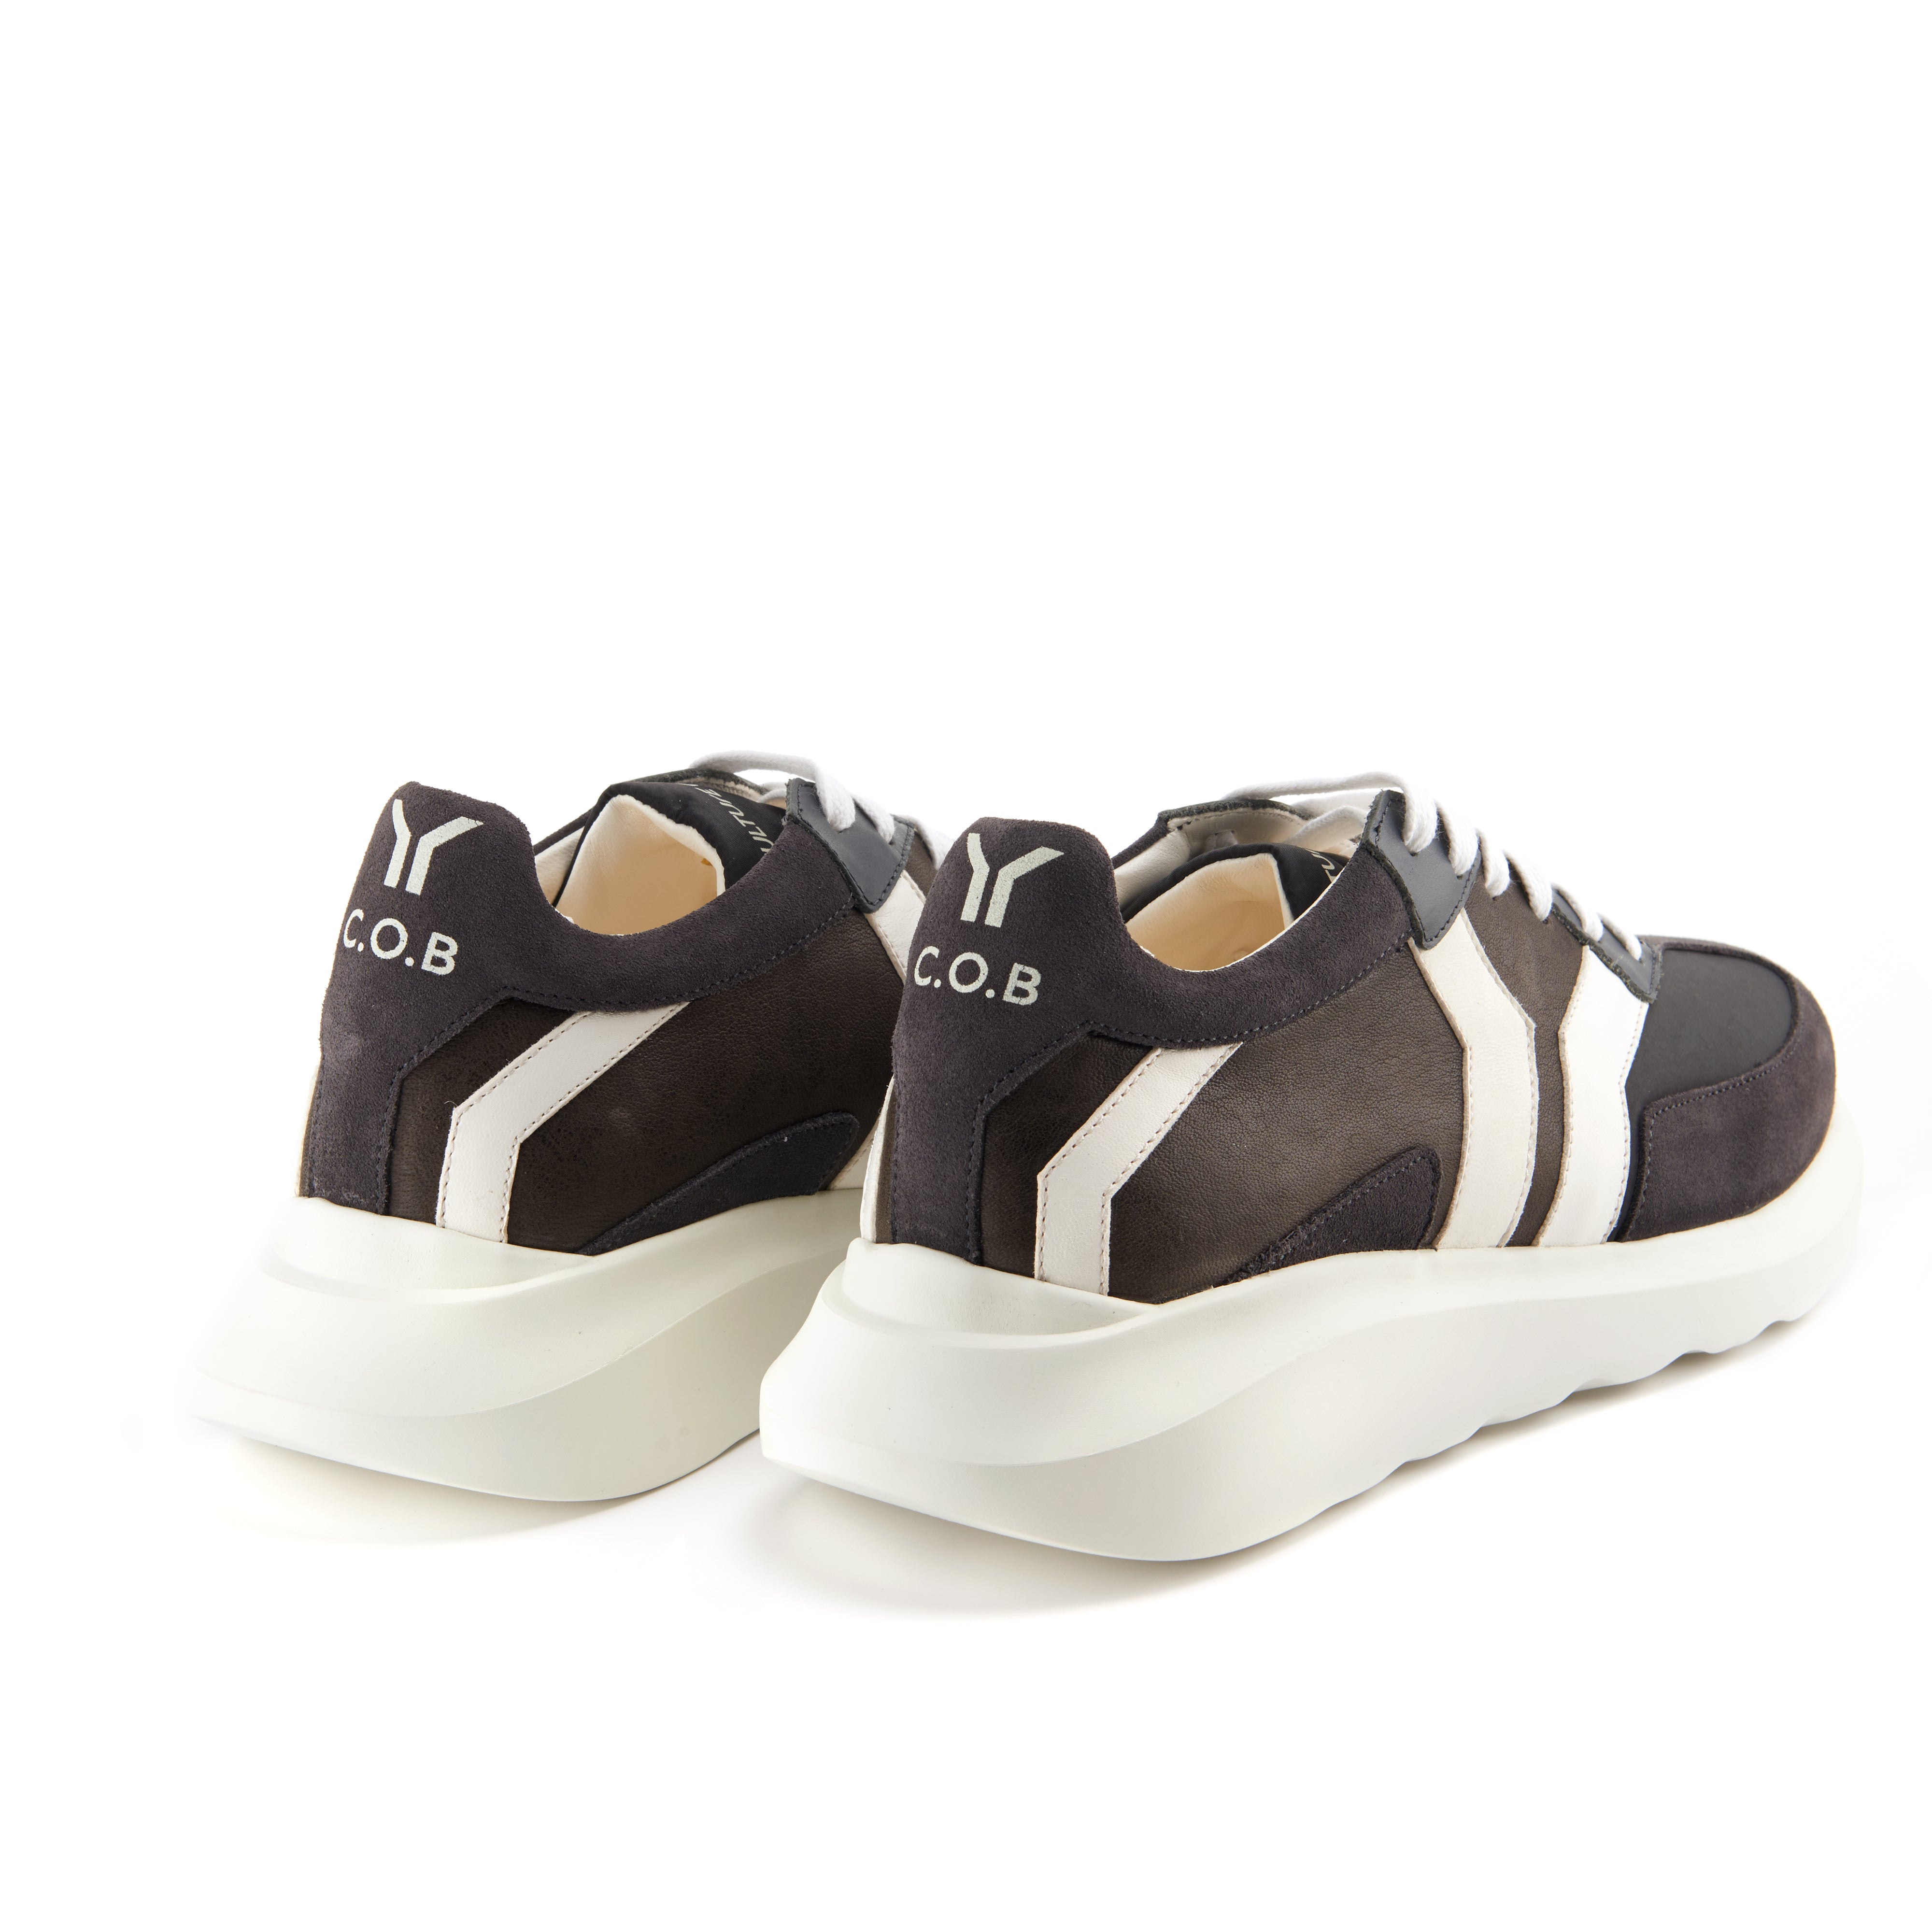 Free Soul_5 Men Charcoal leather white wing low cut